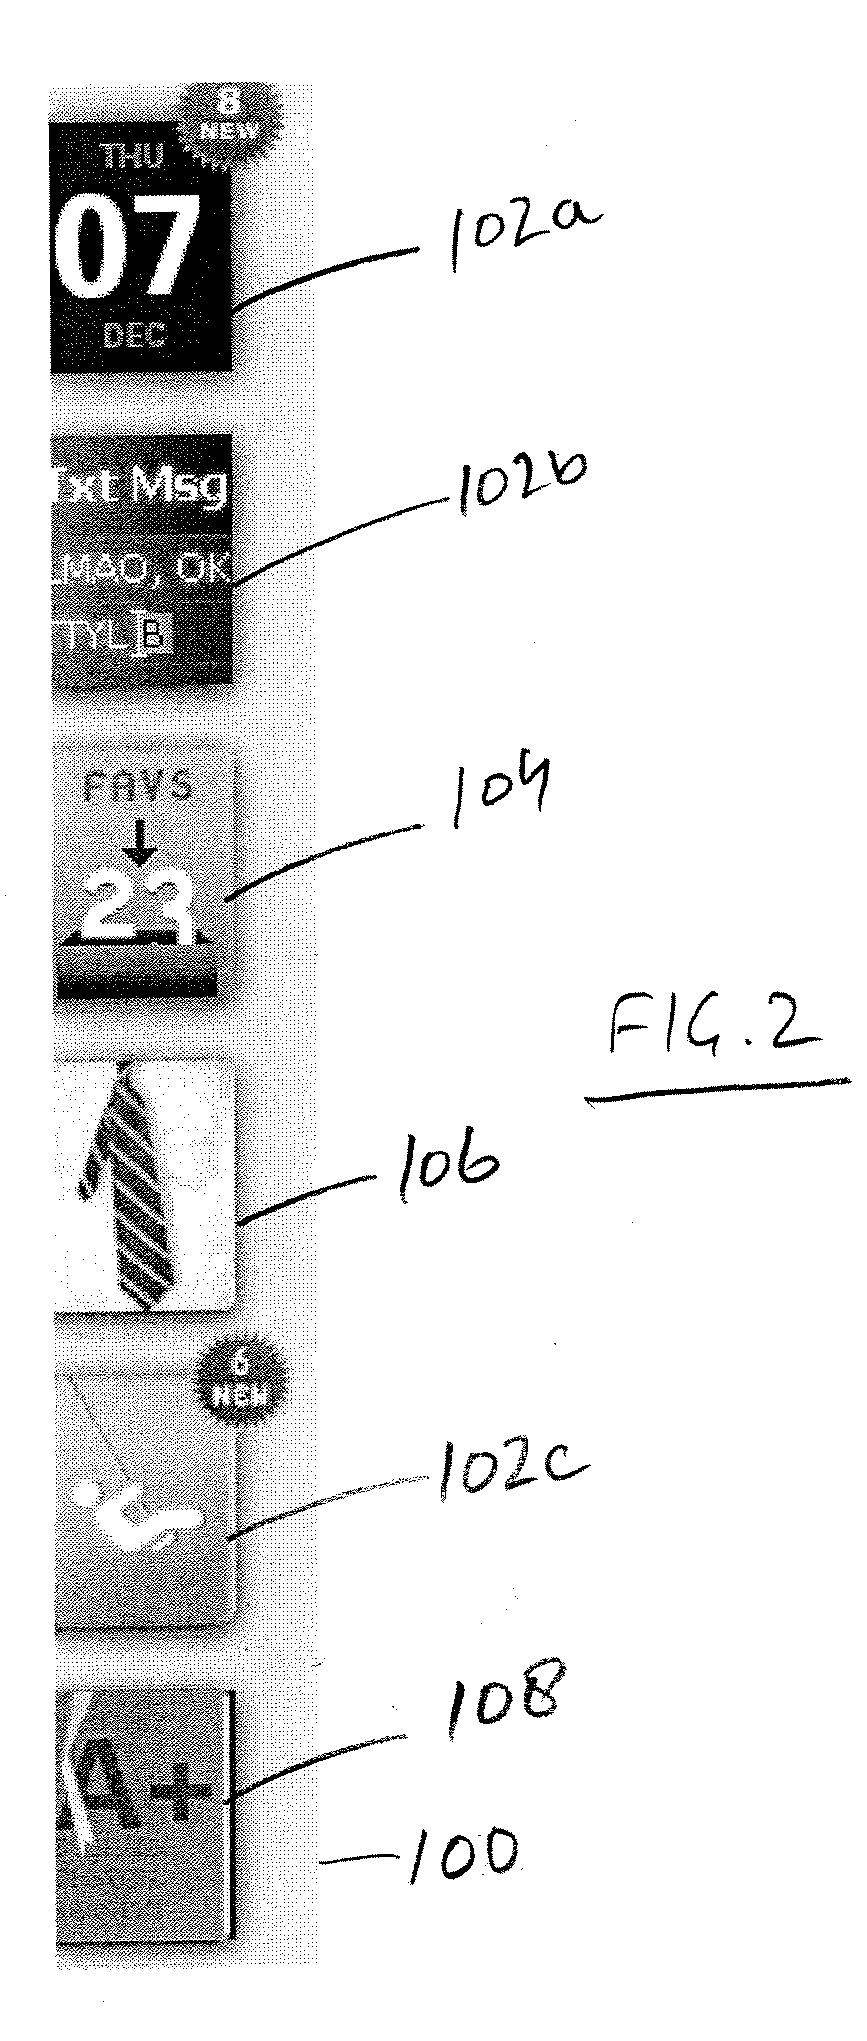 Systems and methods for providing a persistent navigation bar in a word page